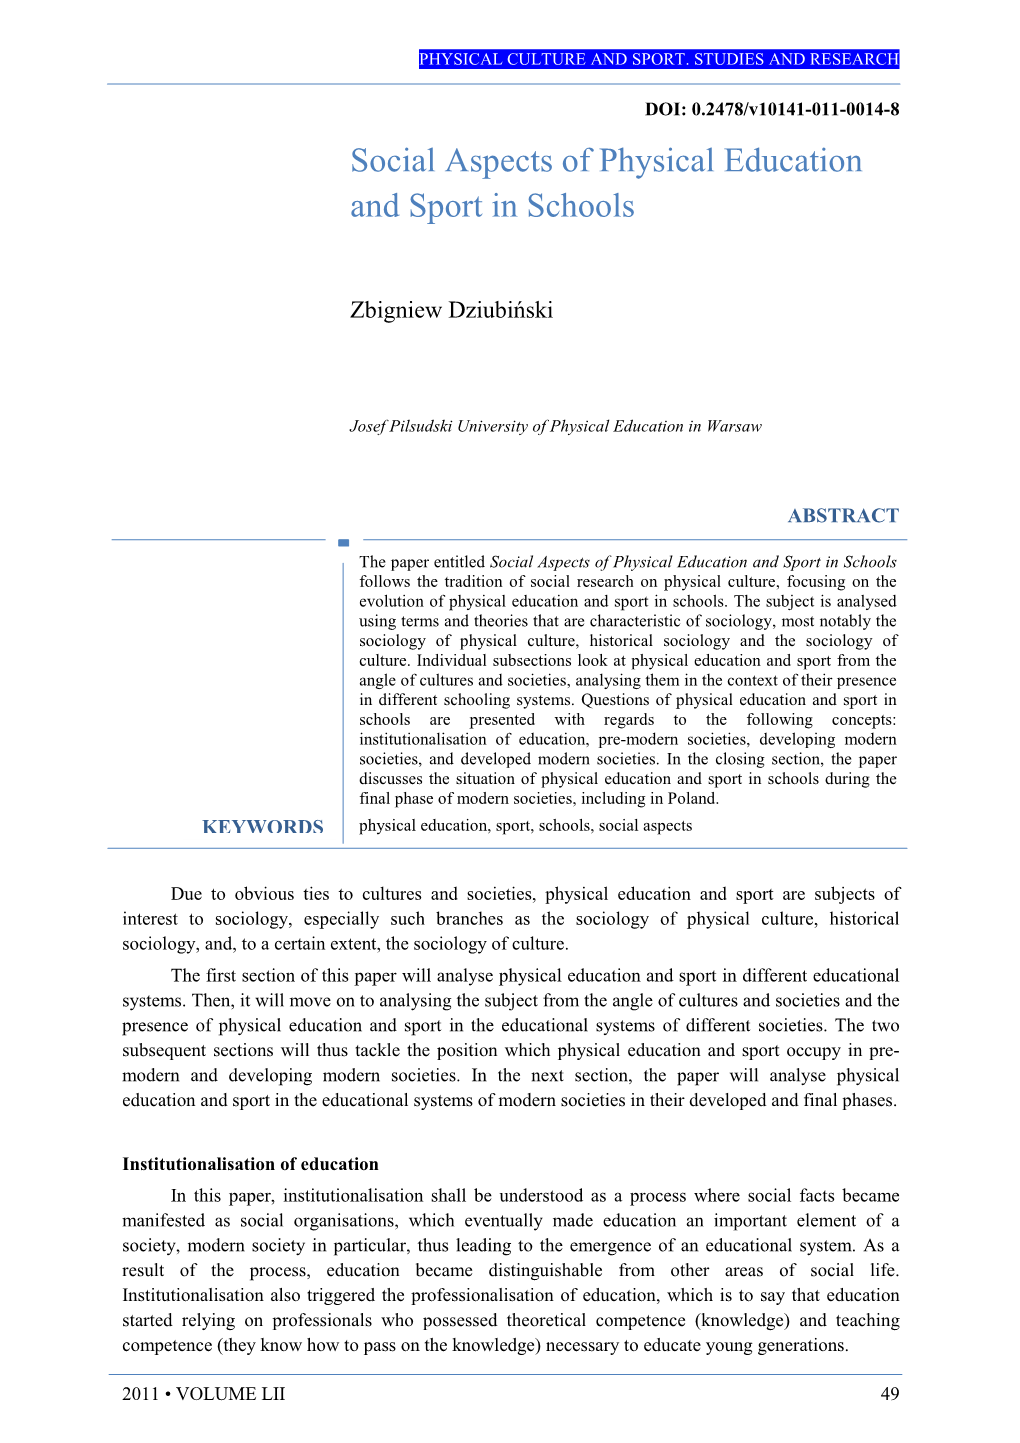 Social Aspects of Physical Education and Sport in Schools